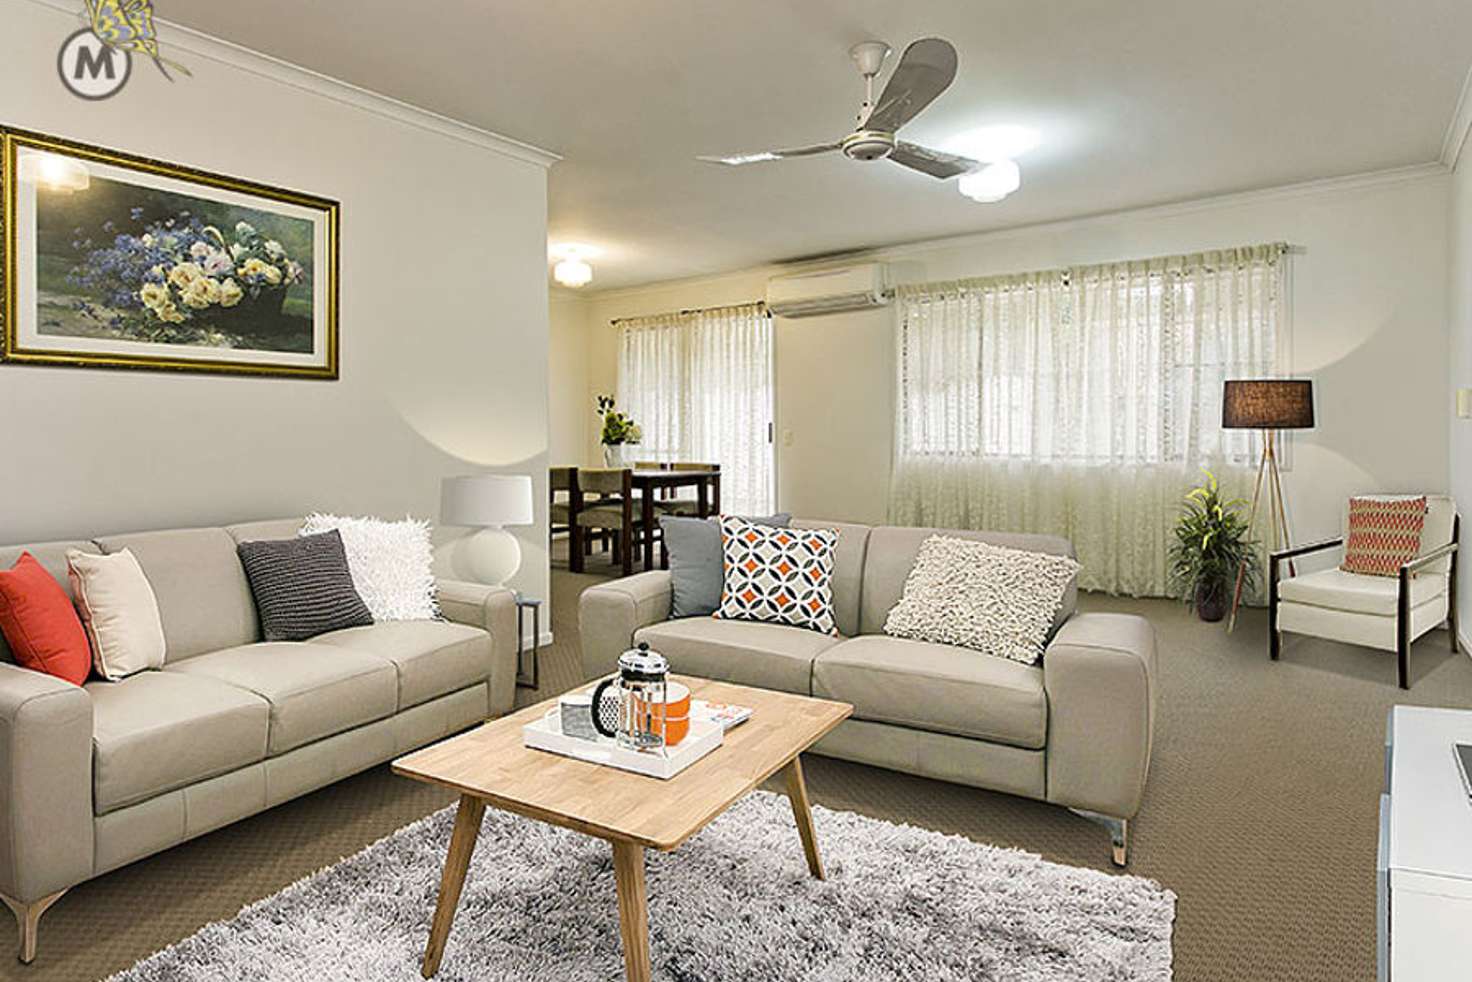 Main view of Homely house listing, 37 Ironwood St, Aspley QLD 4034